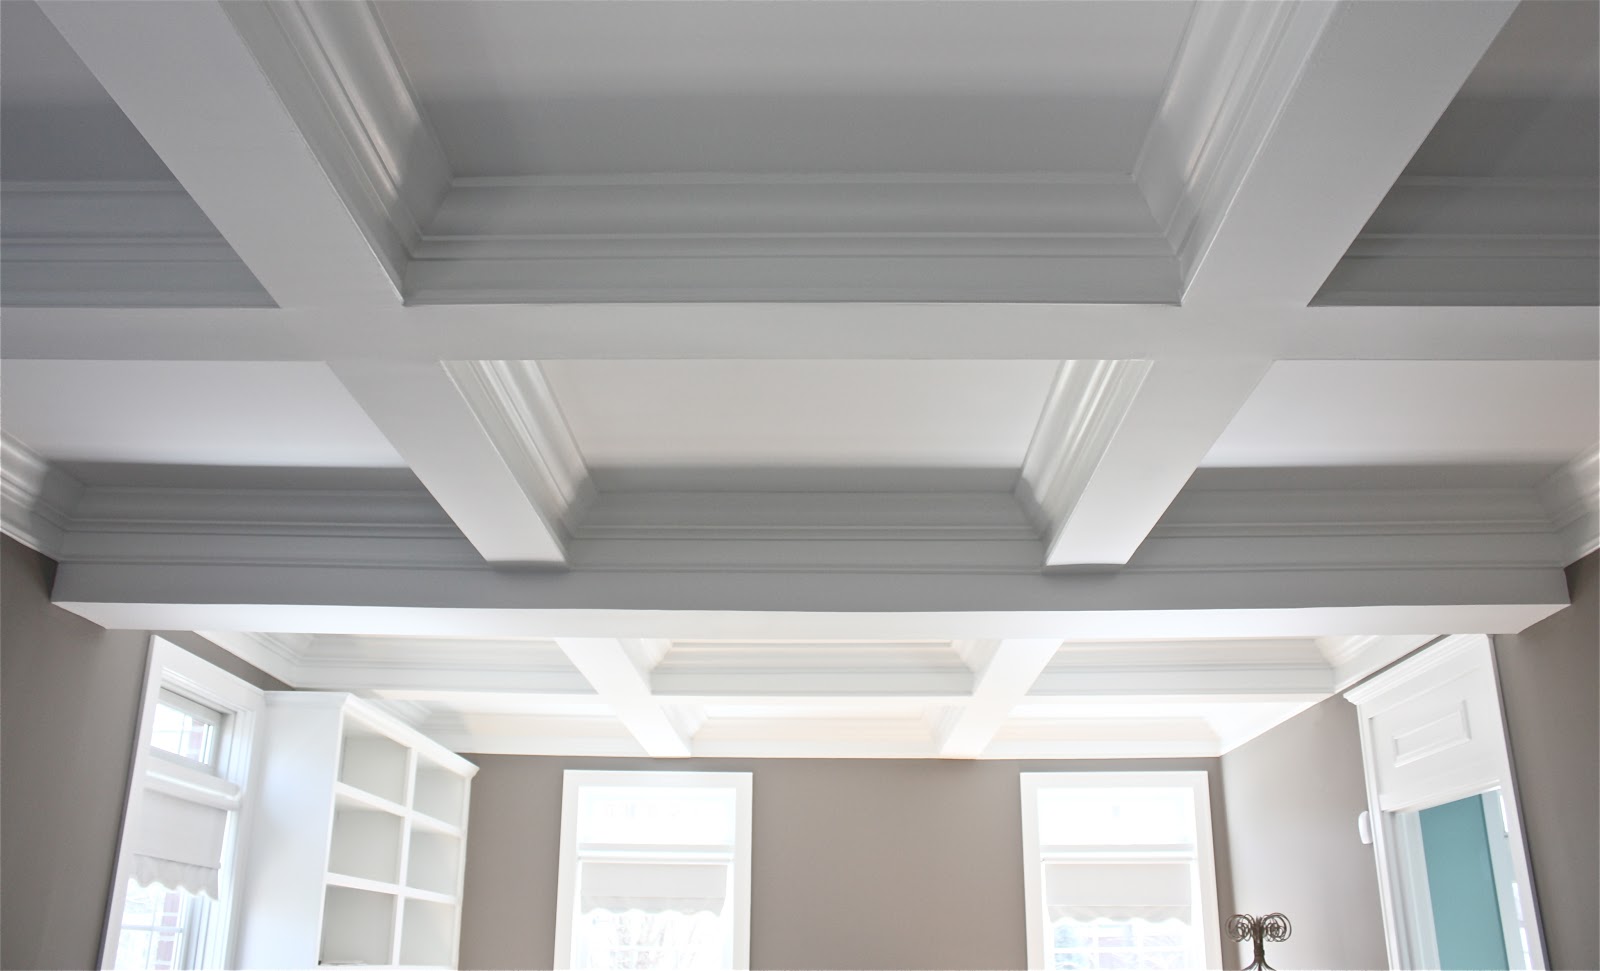 What Is The Cost To Install A Ceiling, How Much Does It Cost To Put In A Coffered Ceiling